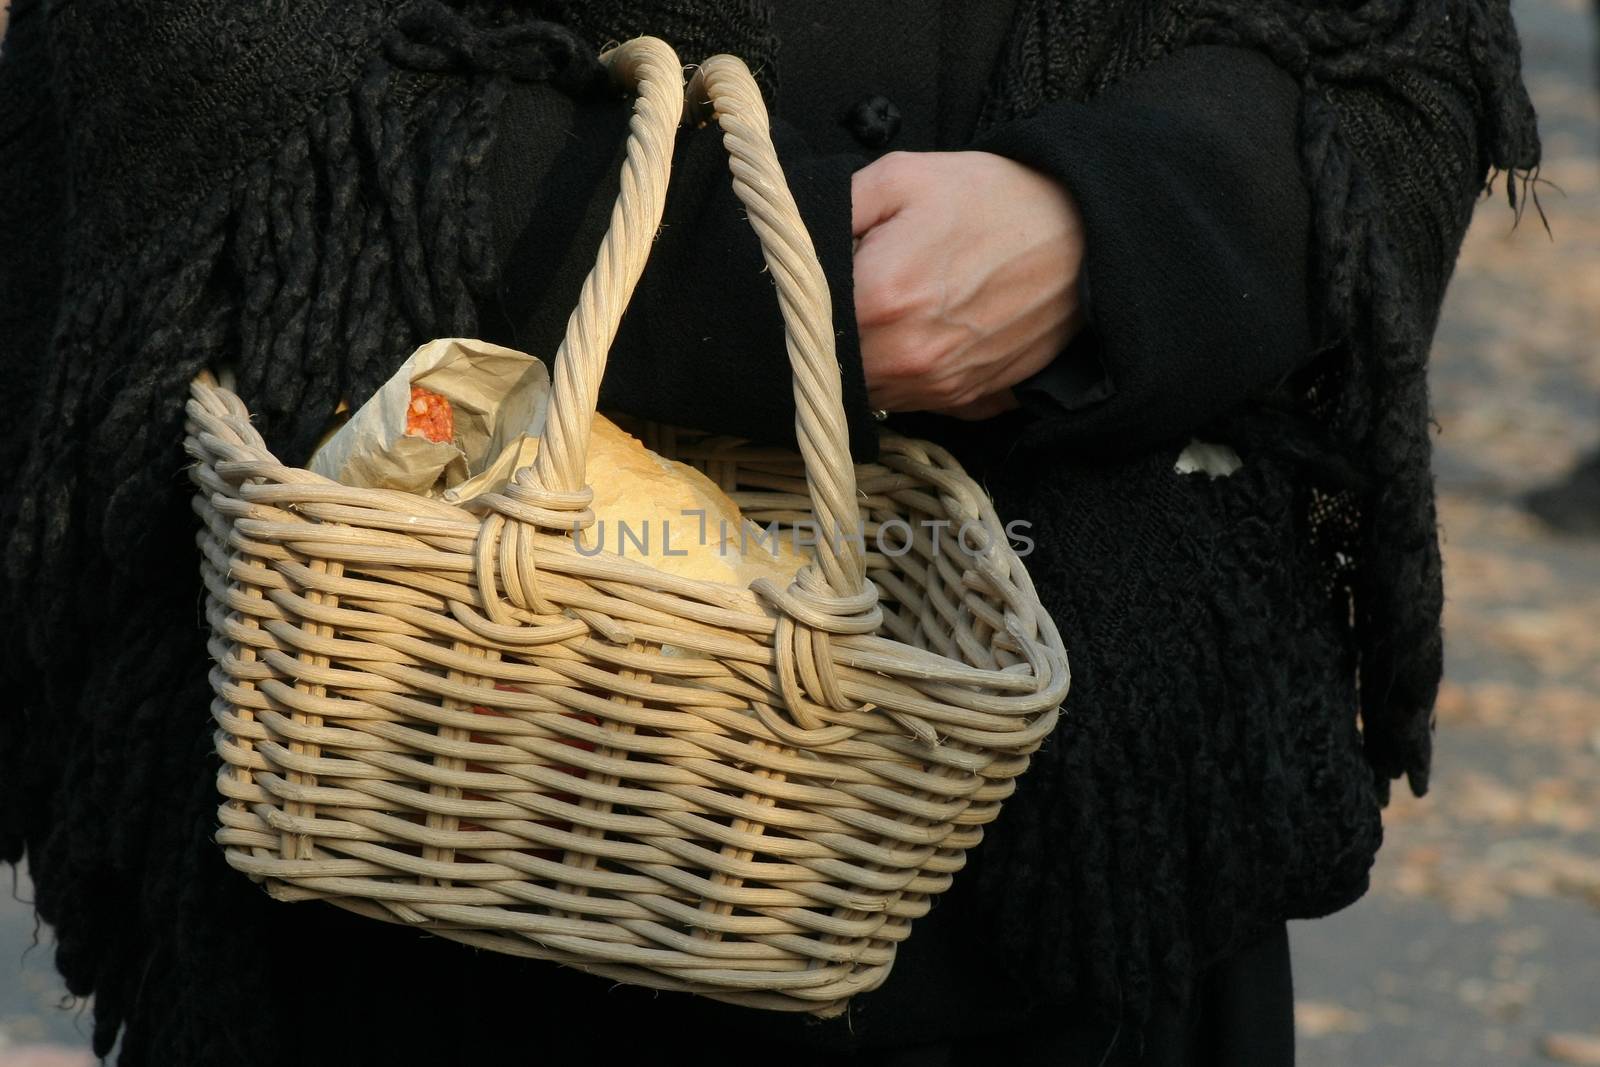 Food basket with bread and sausages.
